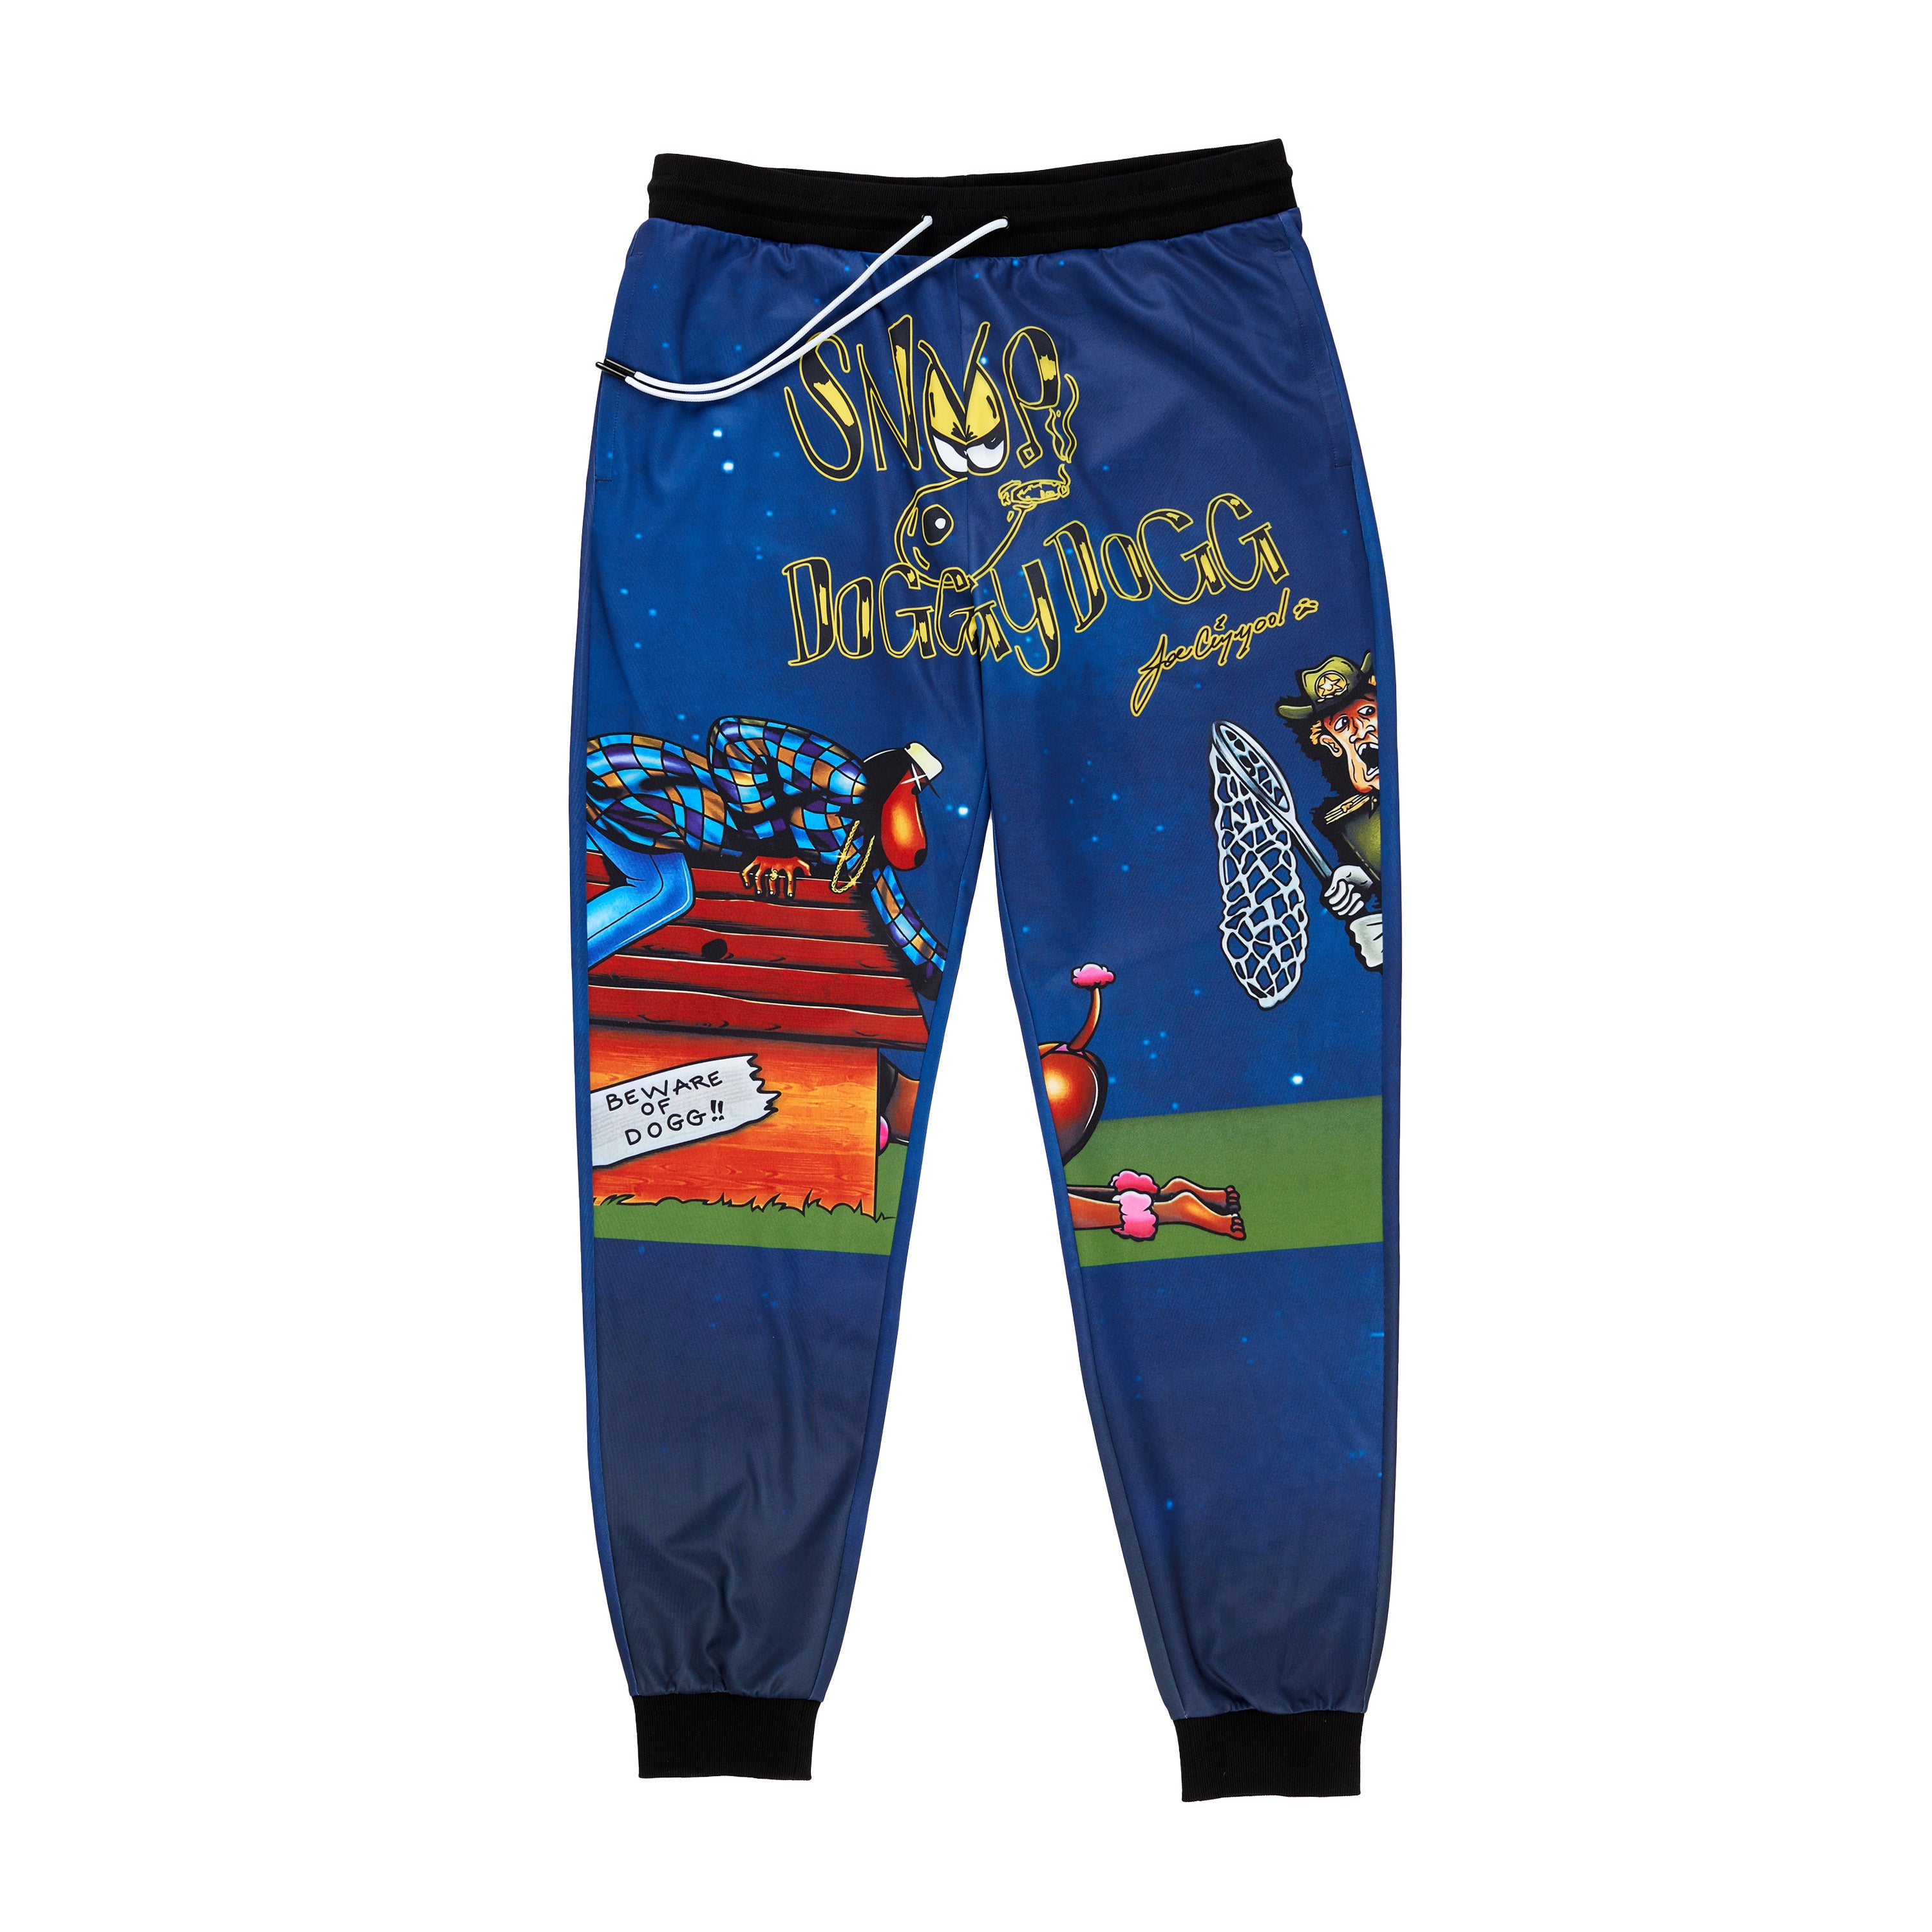 Doggystyle Record Joggers